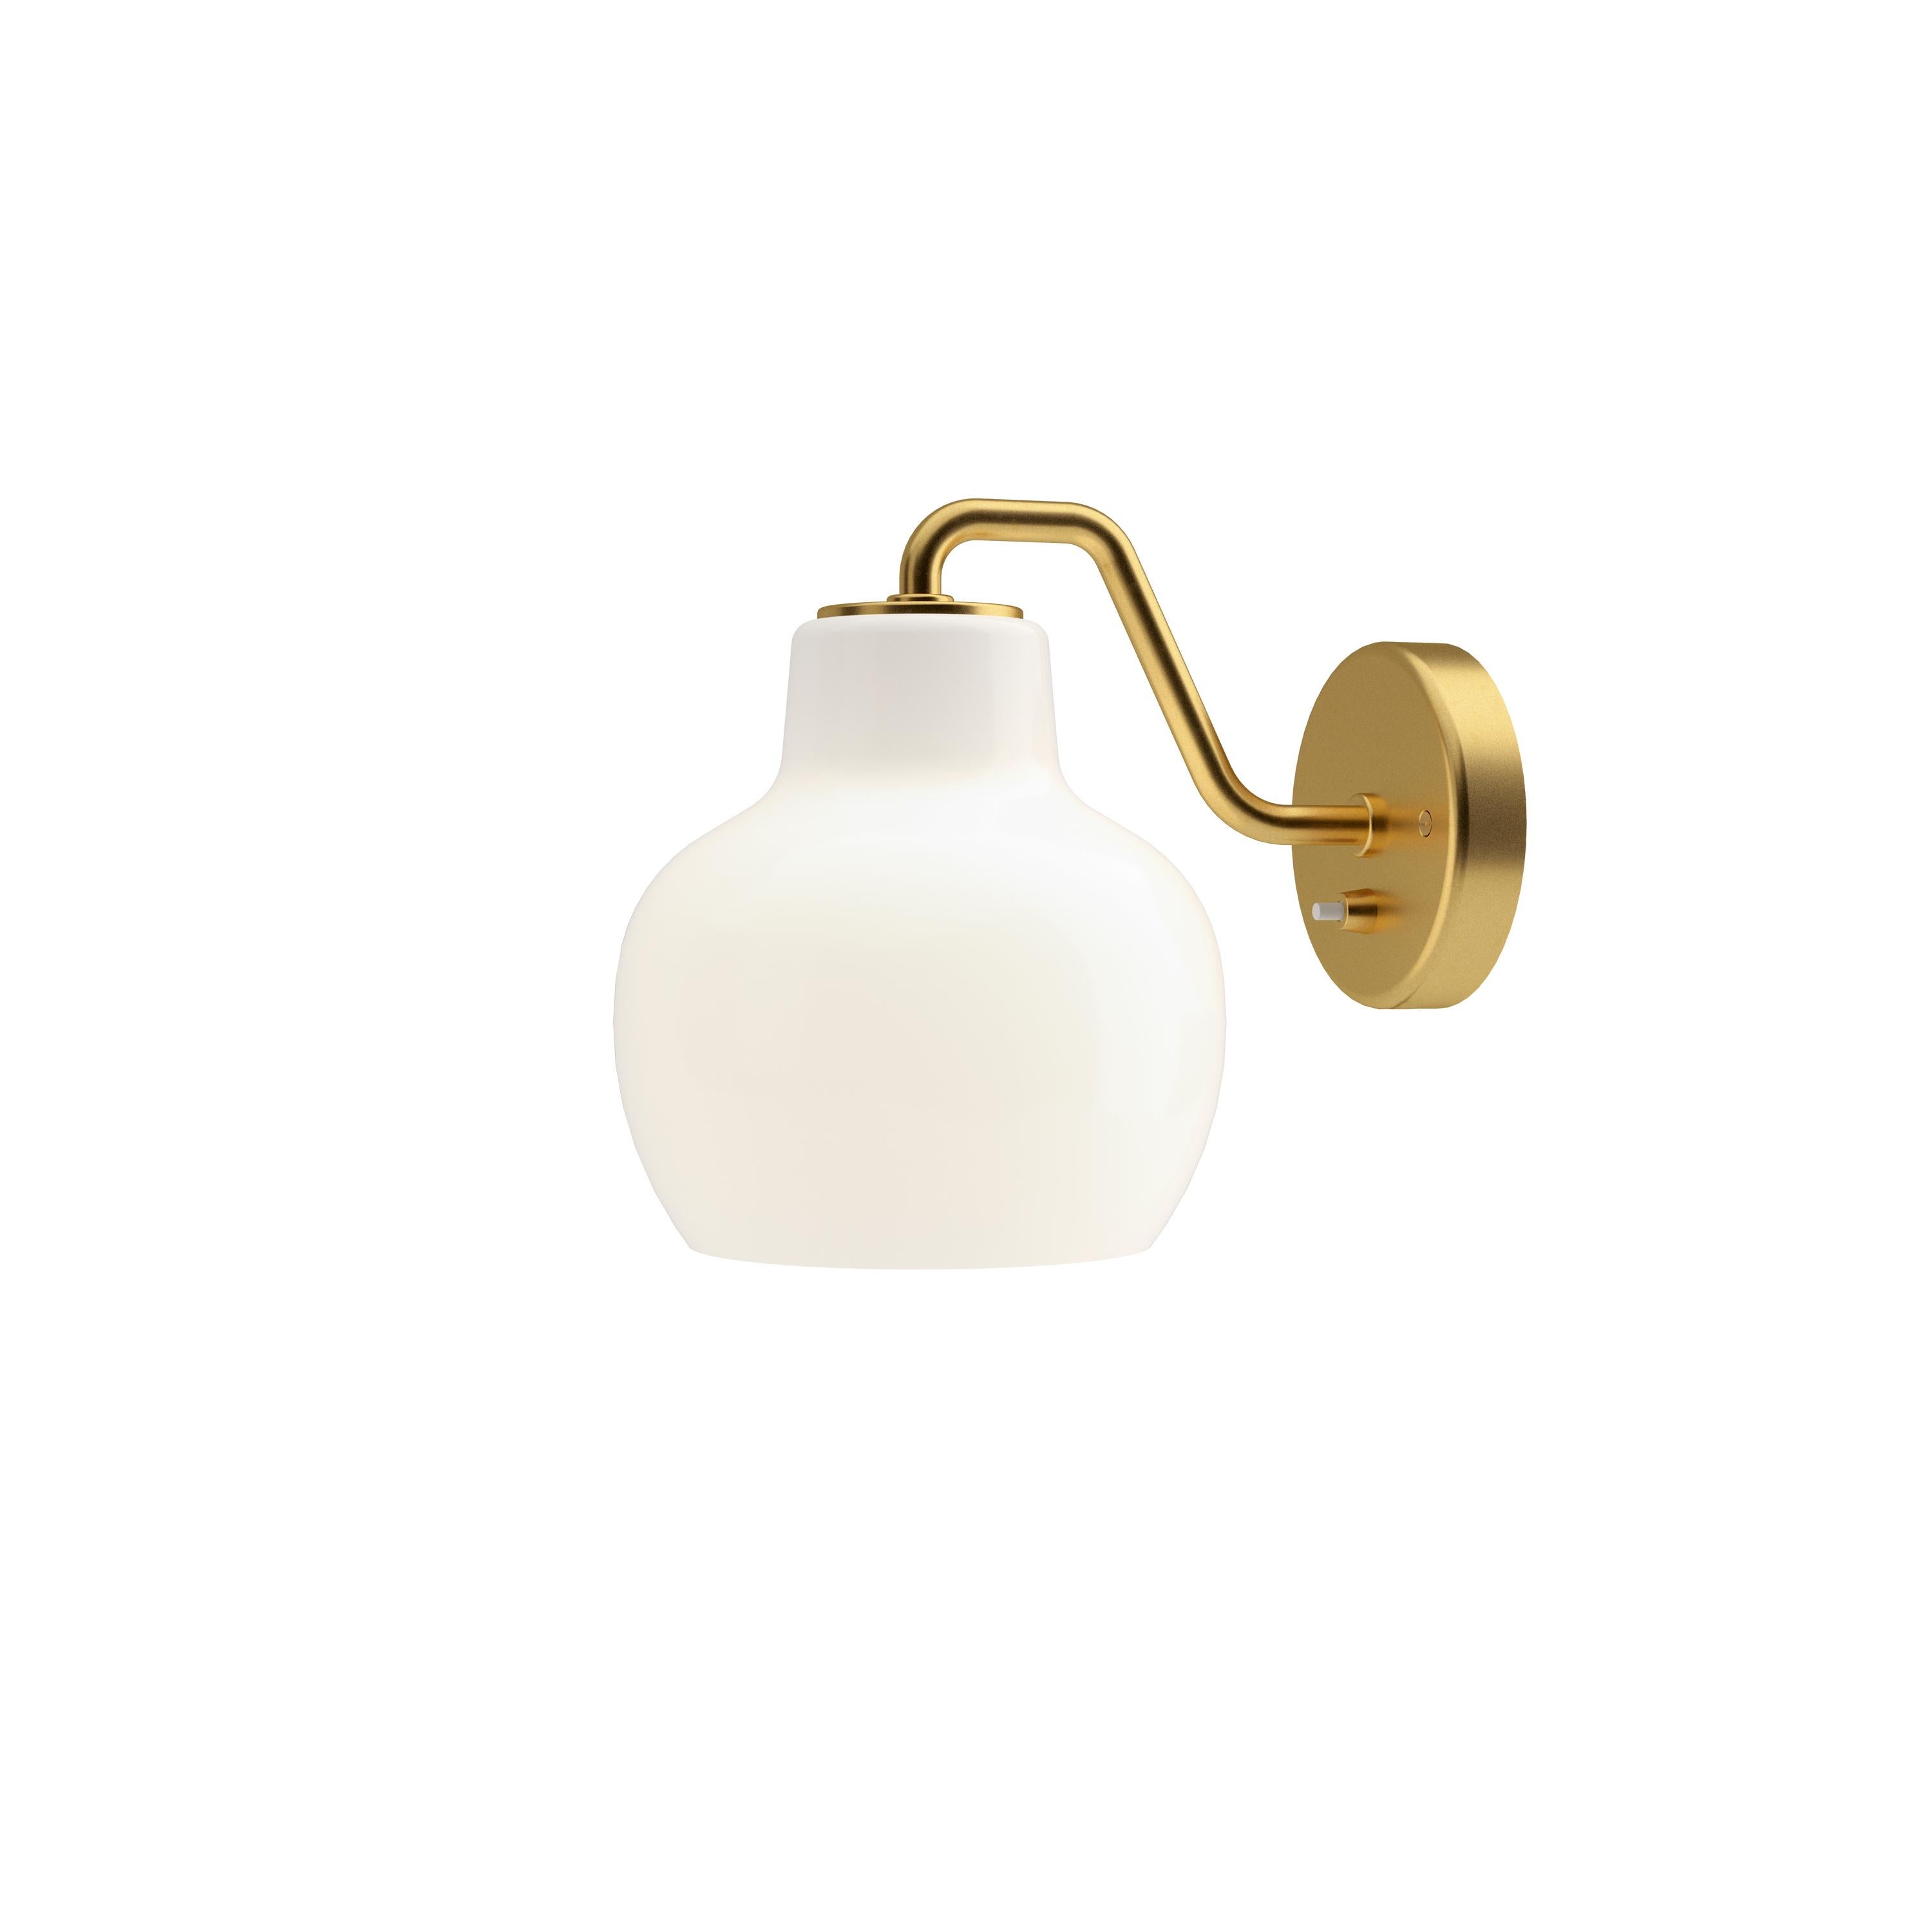 Vilhelm Lauritzen VL-1 brass and glass wall lamp for Louis Poulsen. Executed in a single hand blown glossy white opal glass and unfinished satin polished brass armature and backplate. The sconce emits light directed primarily downwards. The opal